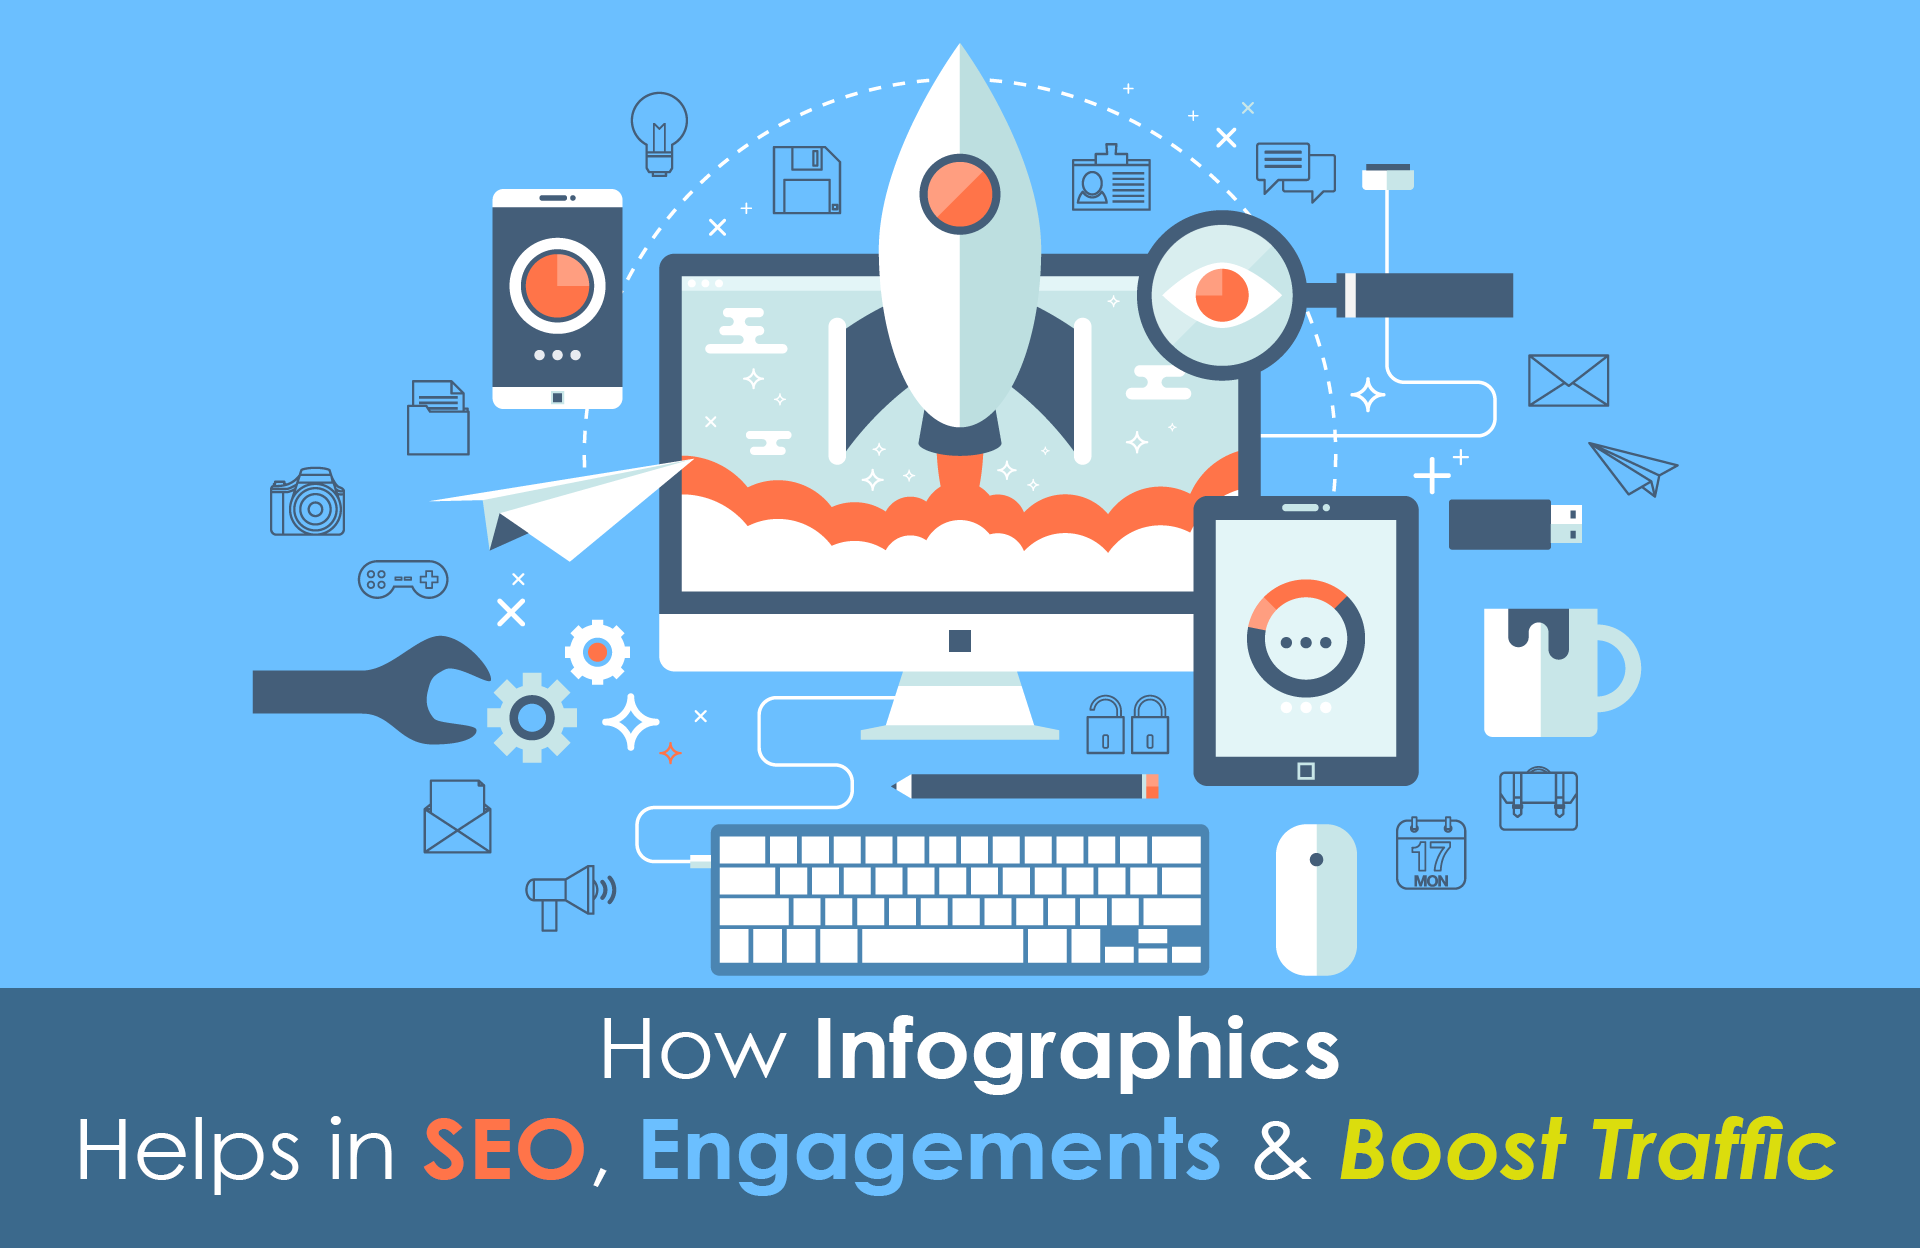 How Infographics are Helps in SEO, Engagements & Boost Traffic